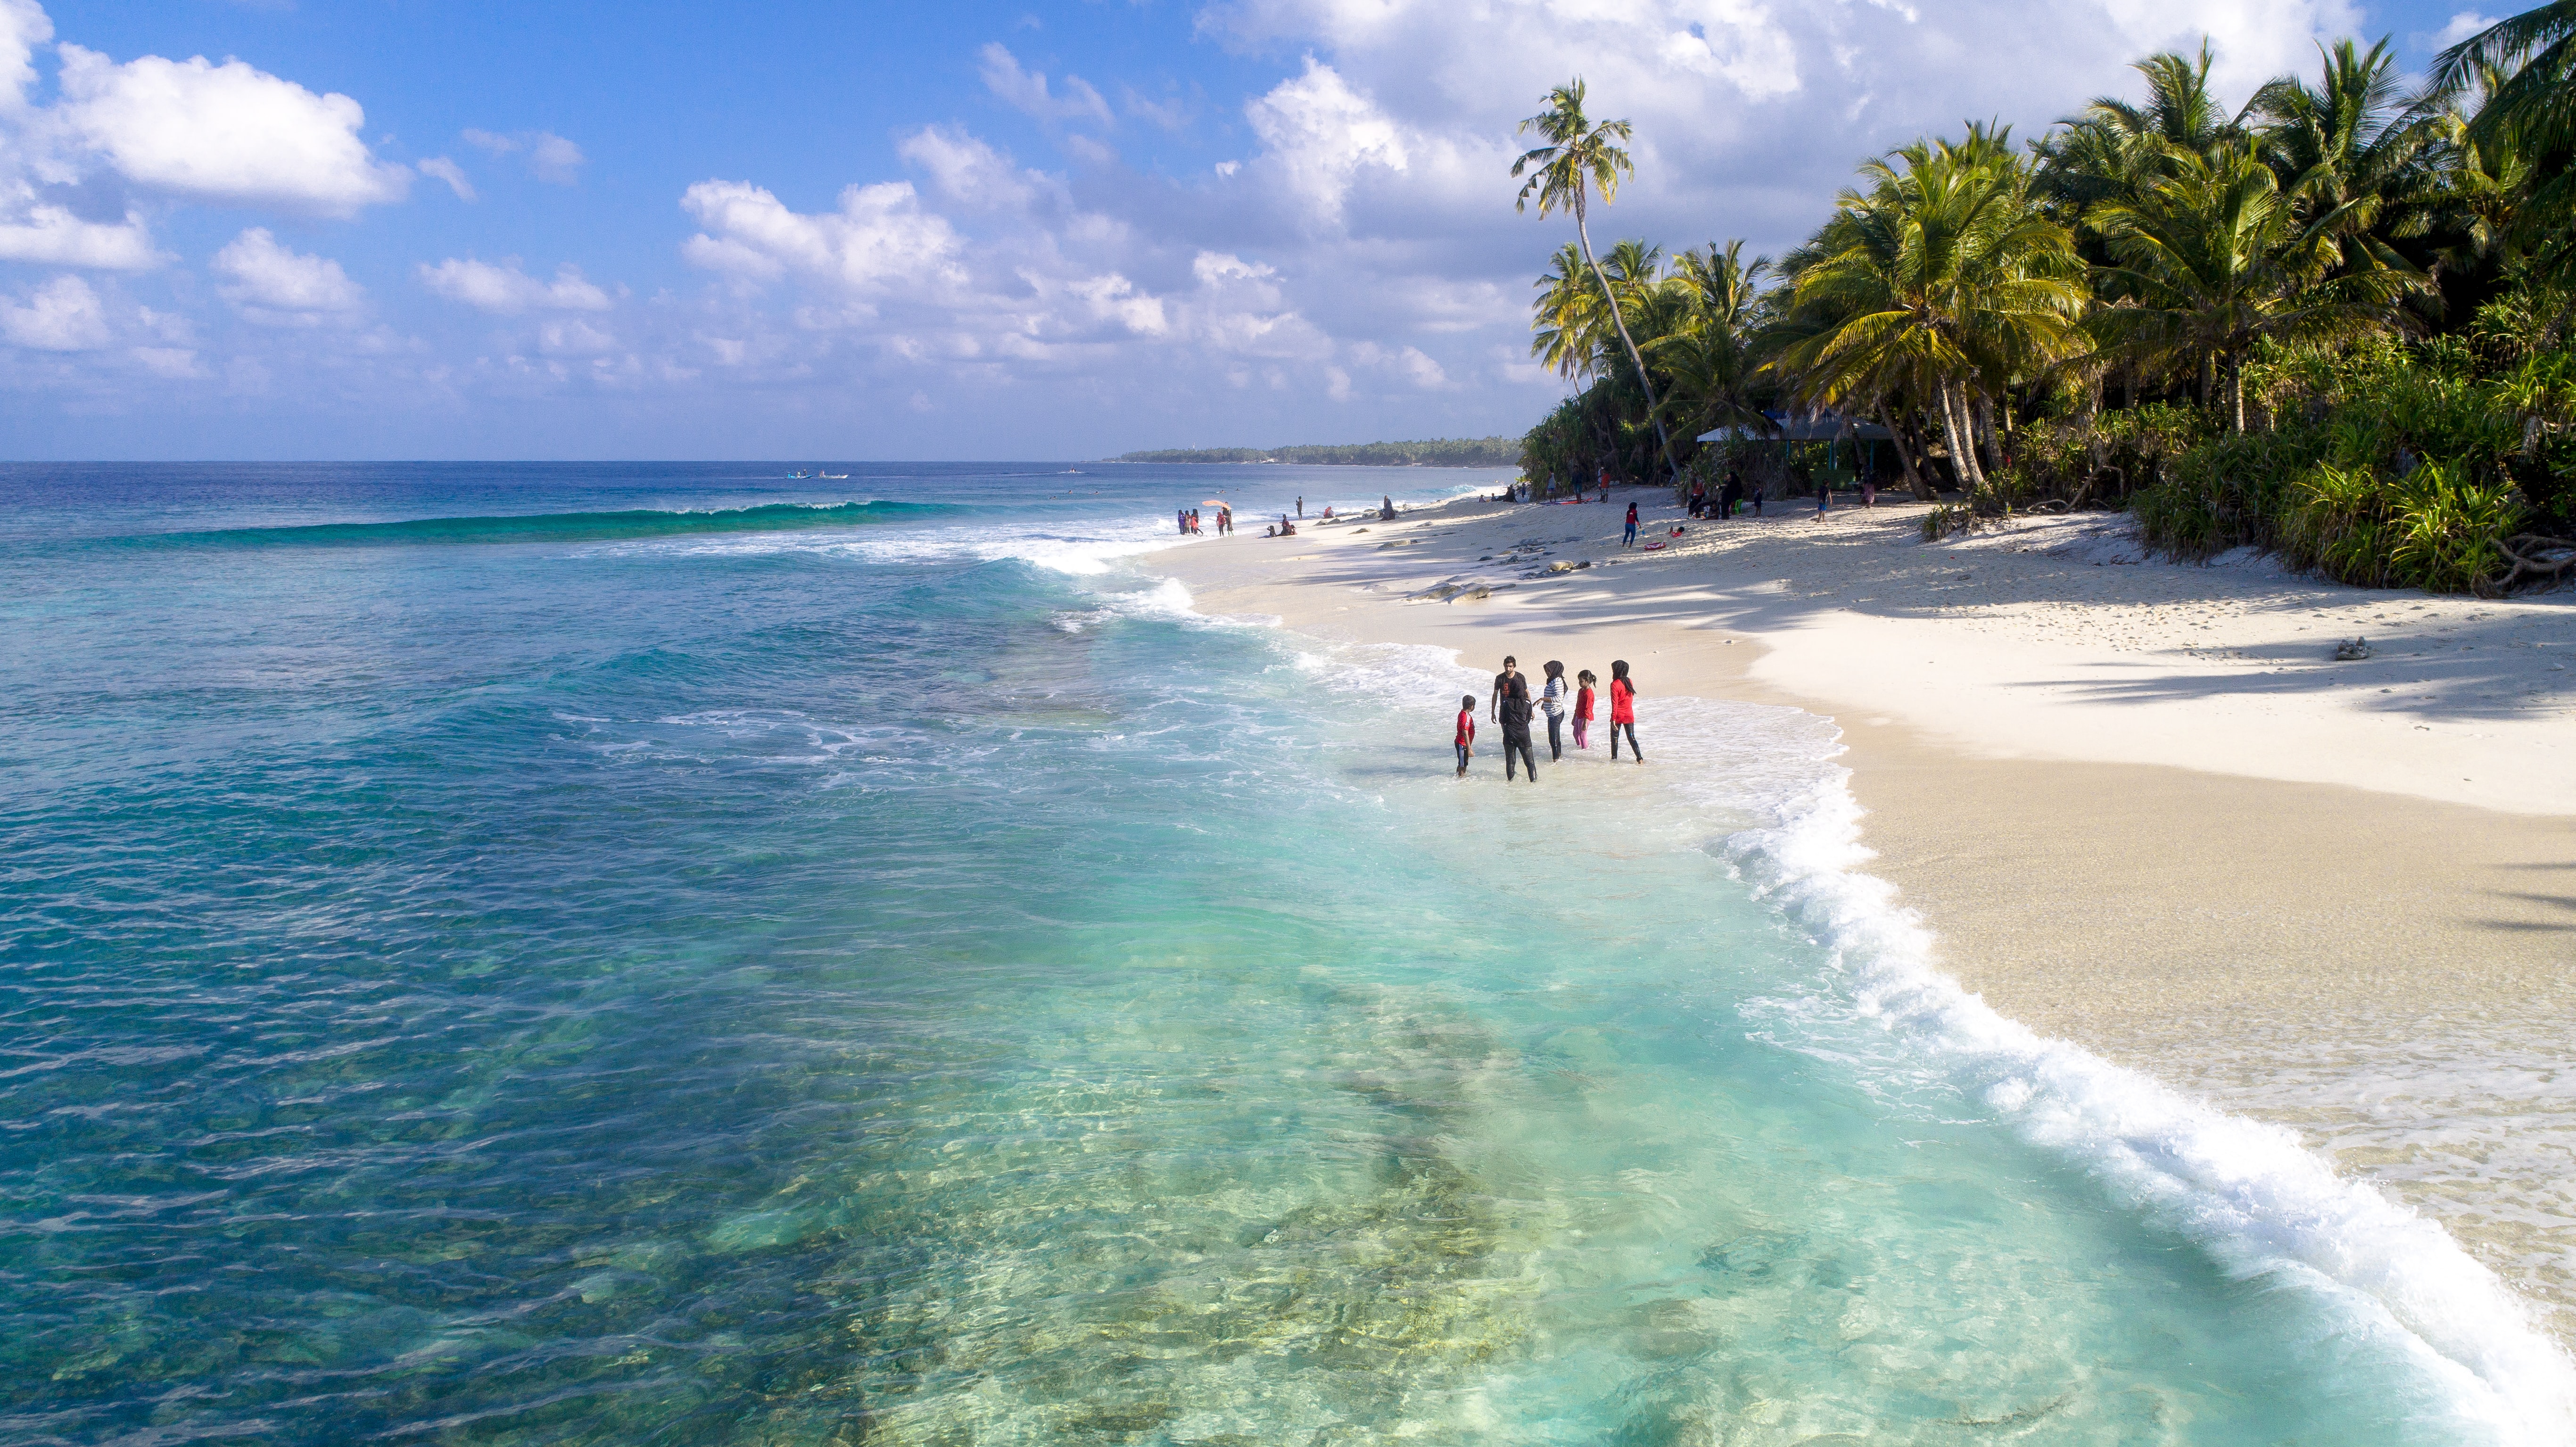 People standing on sandy beach with palm trees